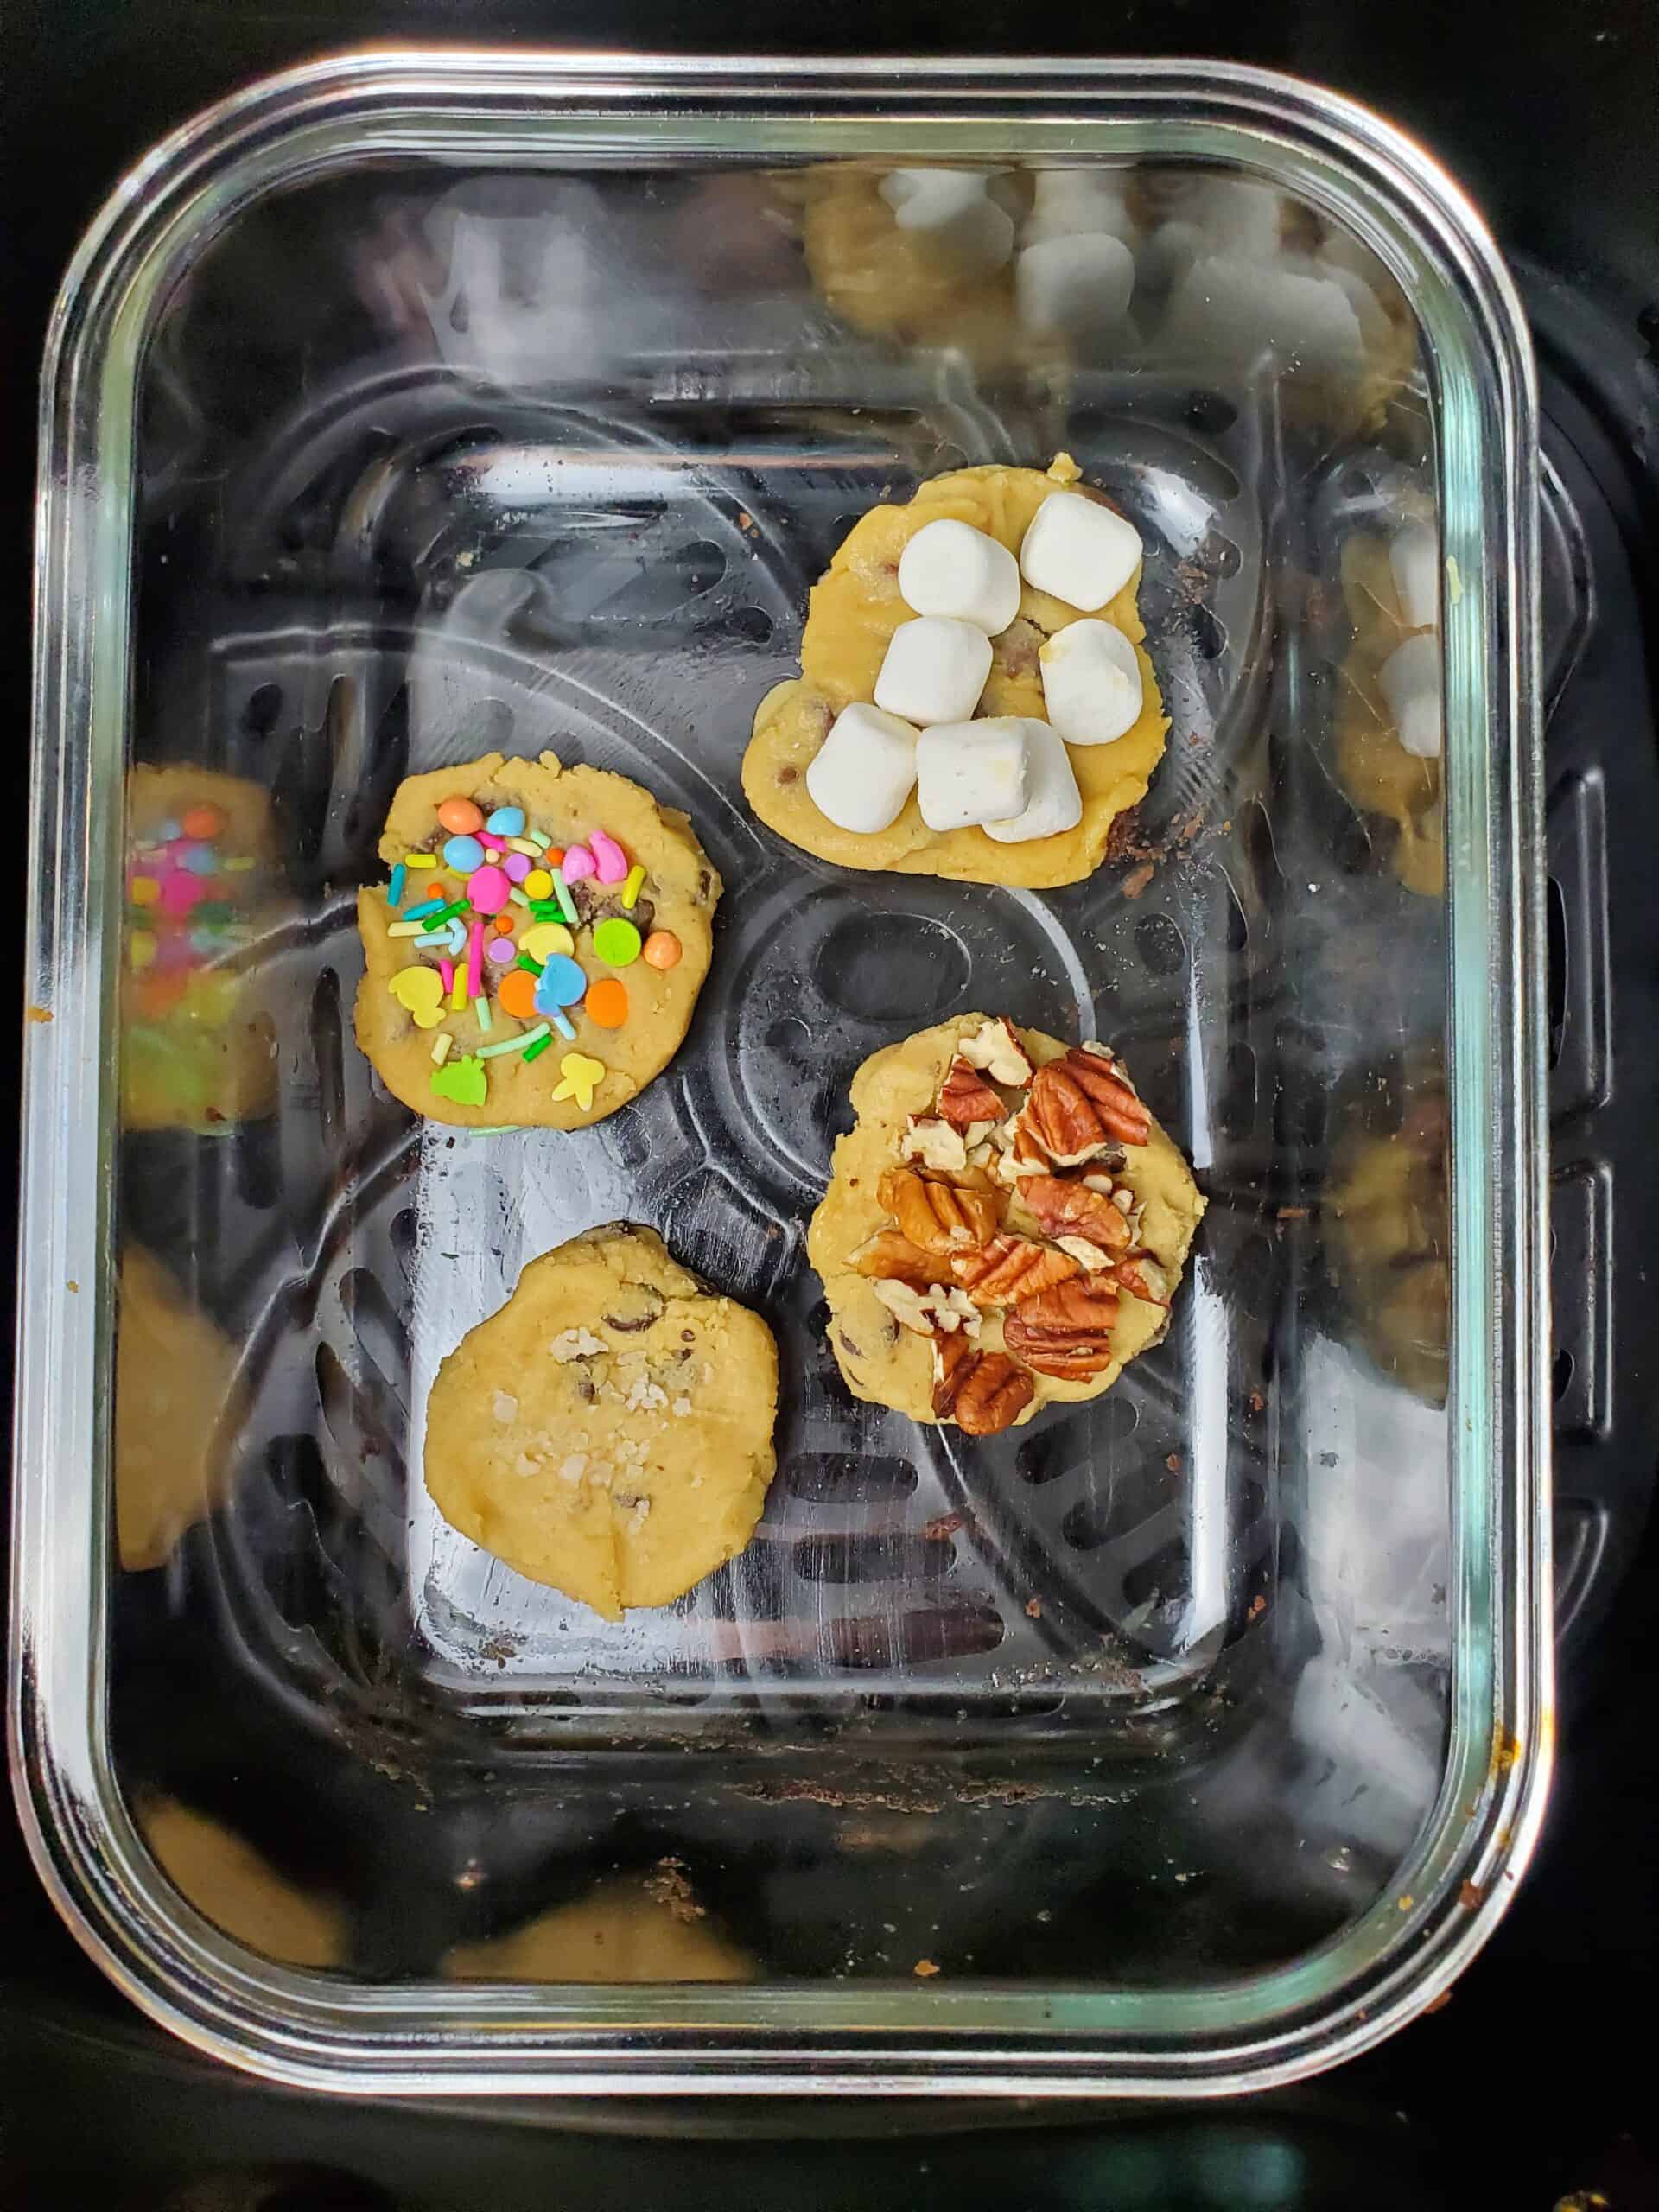 Cookies with toppings about to bake in the air fryer.